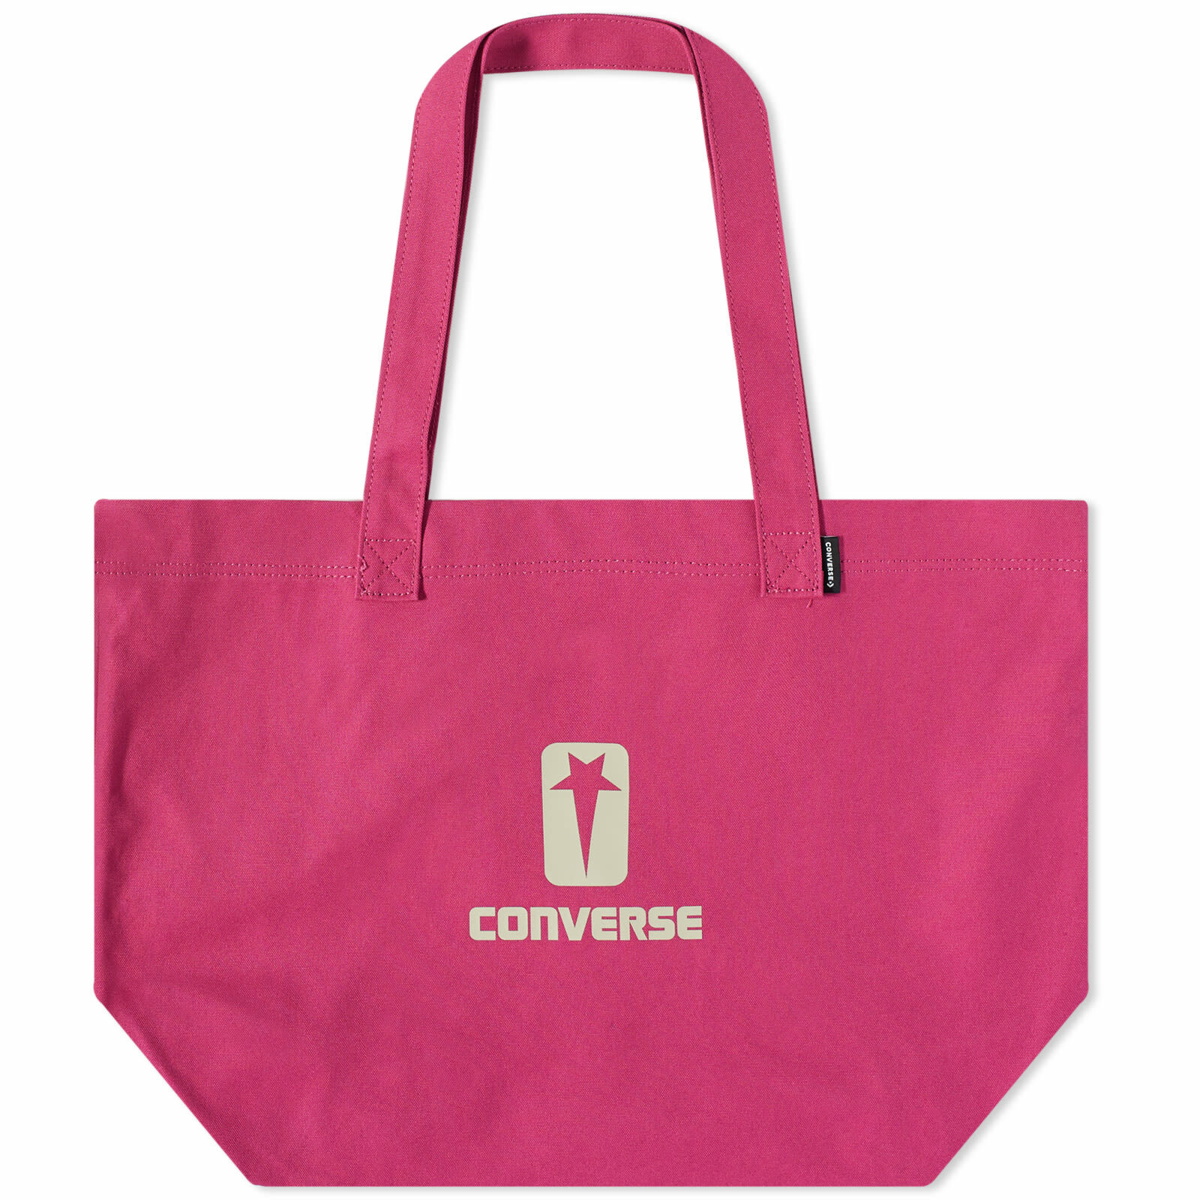 Converse x DRKSHDW Tote Bag in Hot Pink Converse